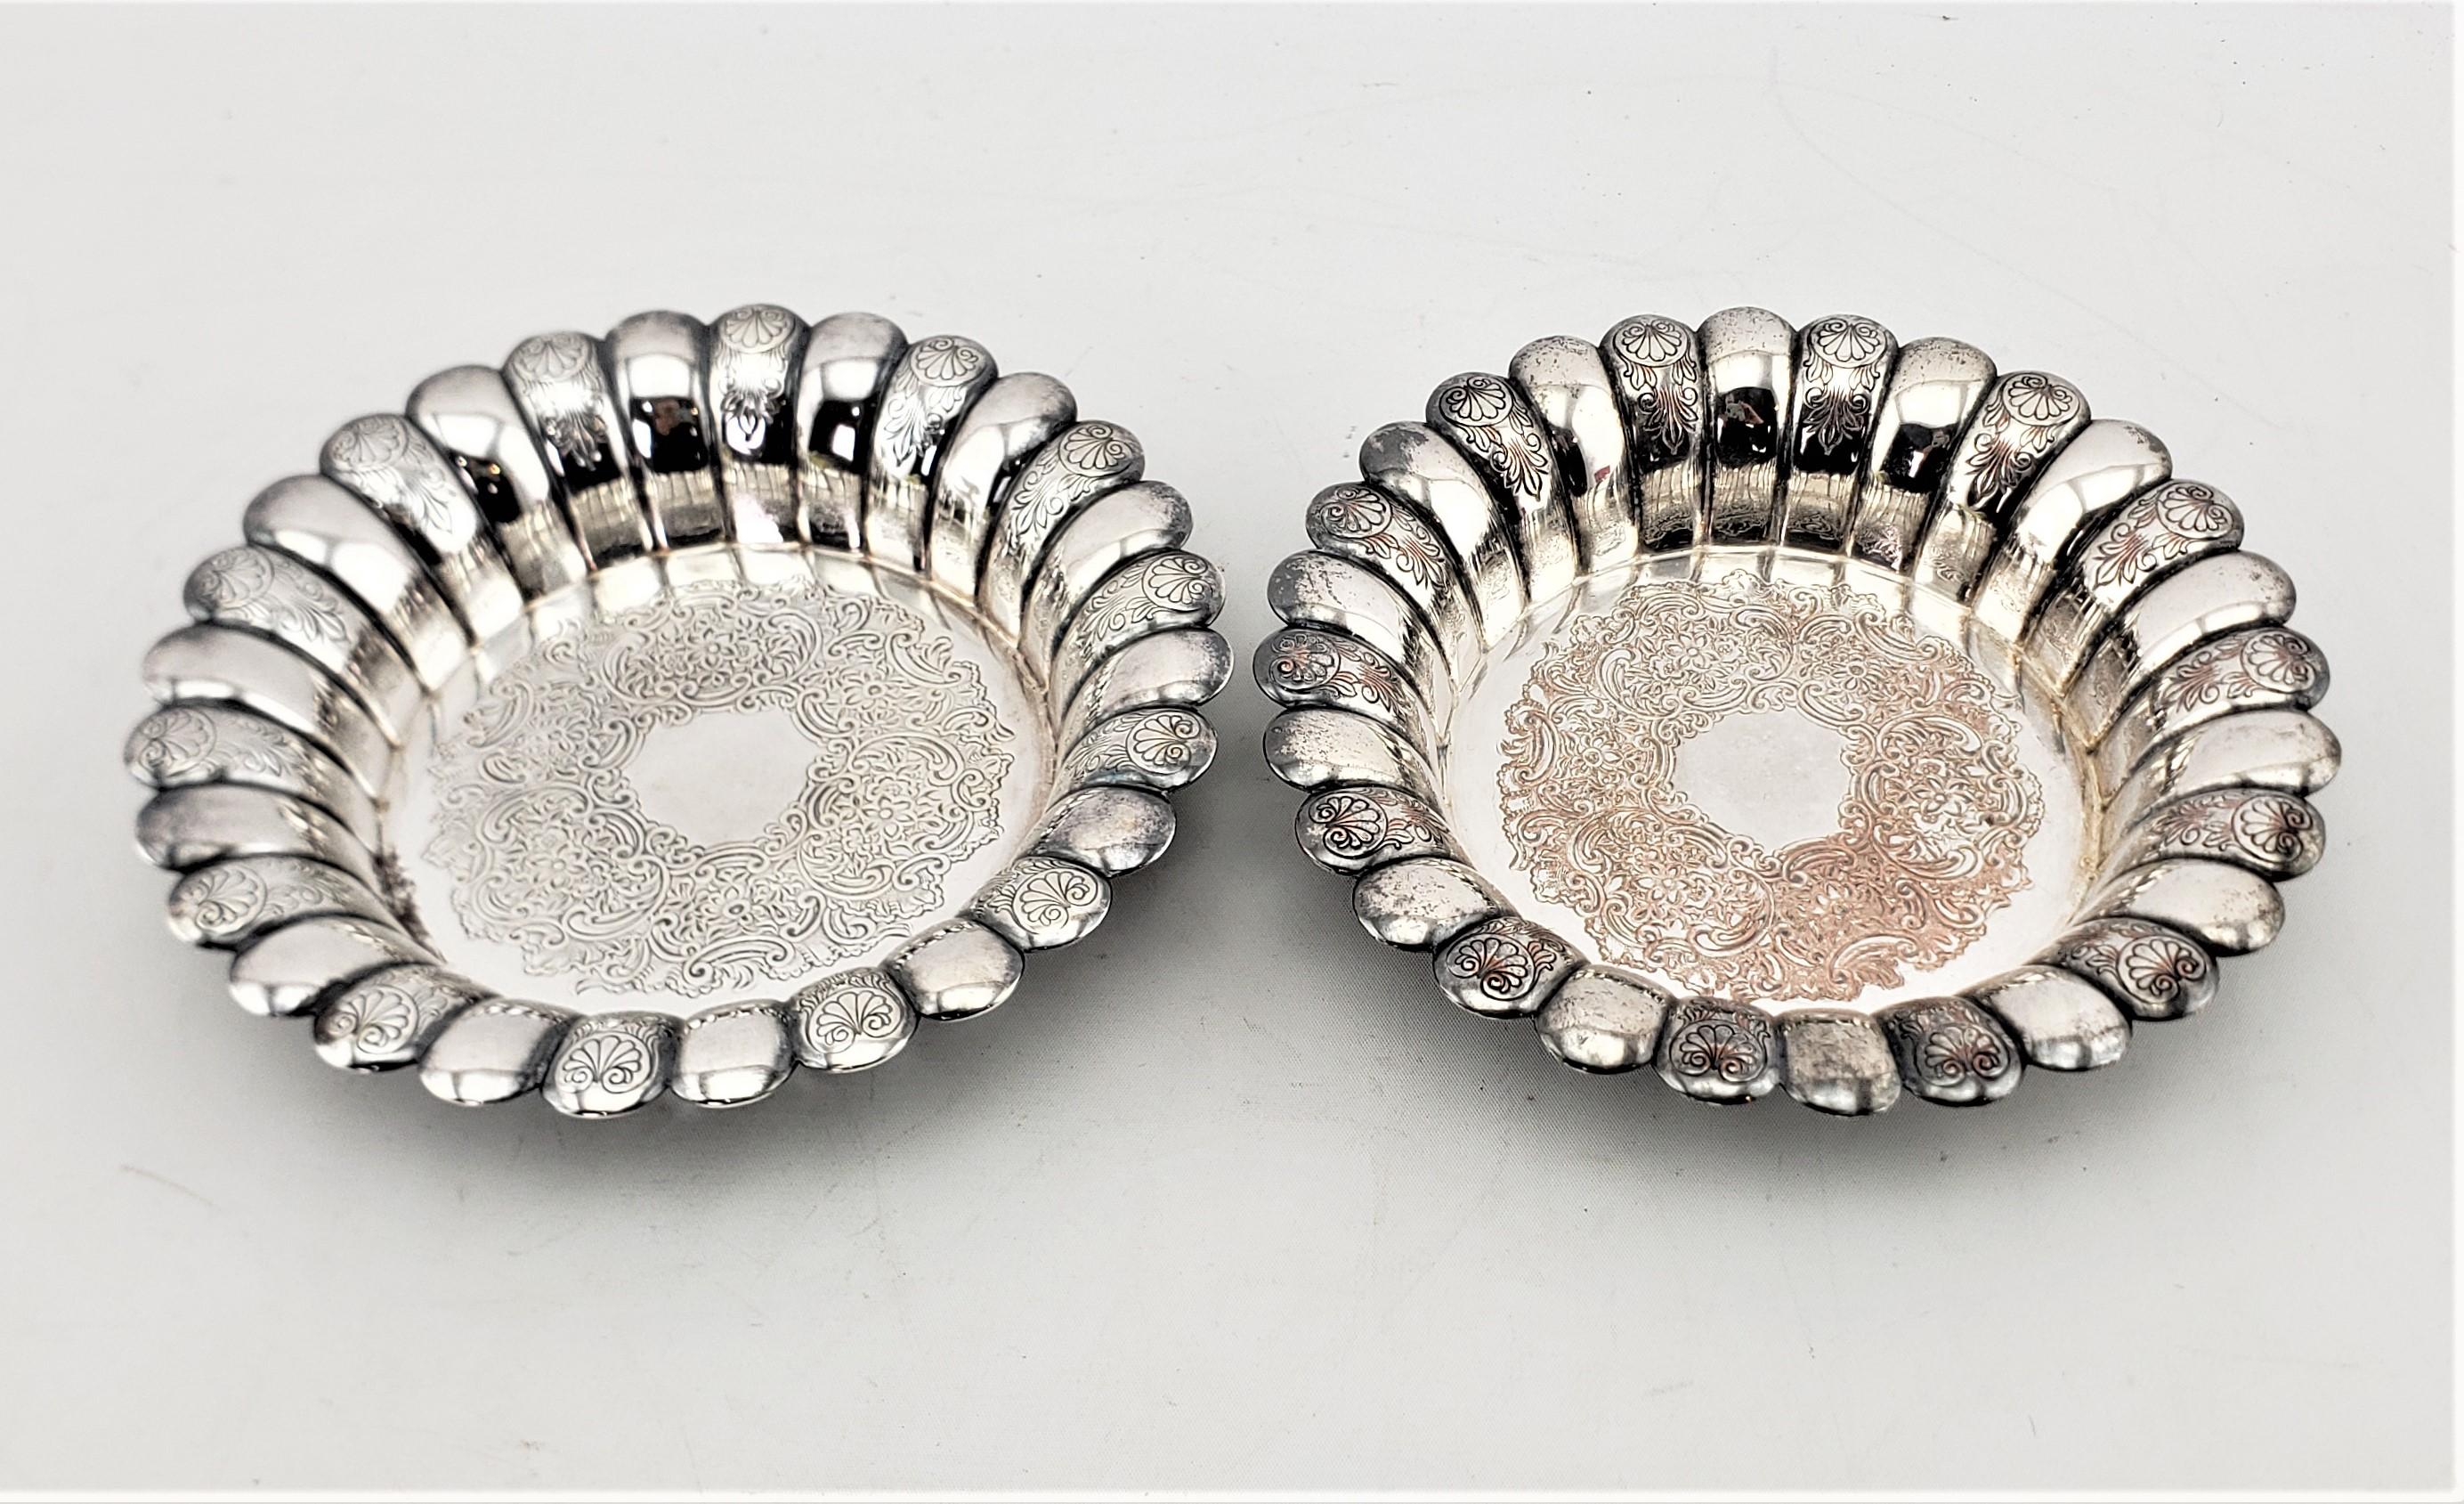 This pair of antique silver plated bottle coasters was made by the well known Barker-Ellis Silver Co. of England in approximately 1920 in an Edwardian style. The coasters are done with a curled scalloped edge with engraved stylized shells on